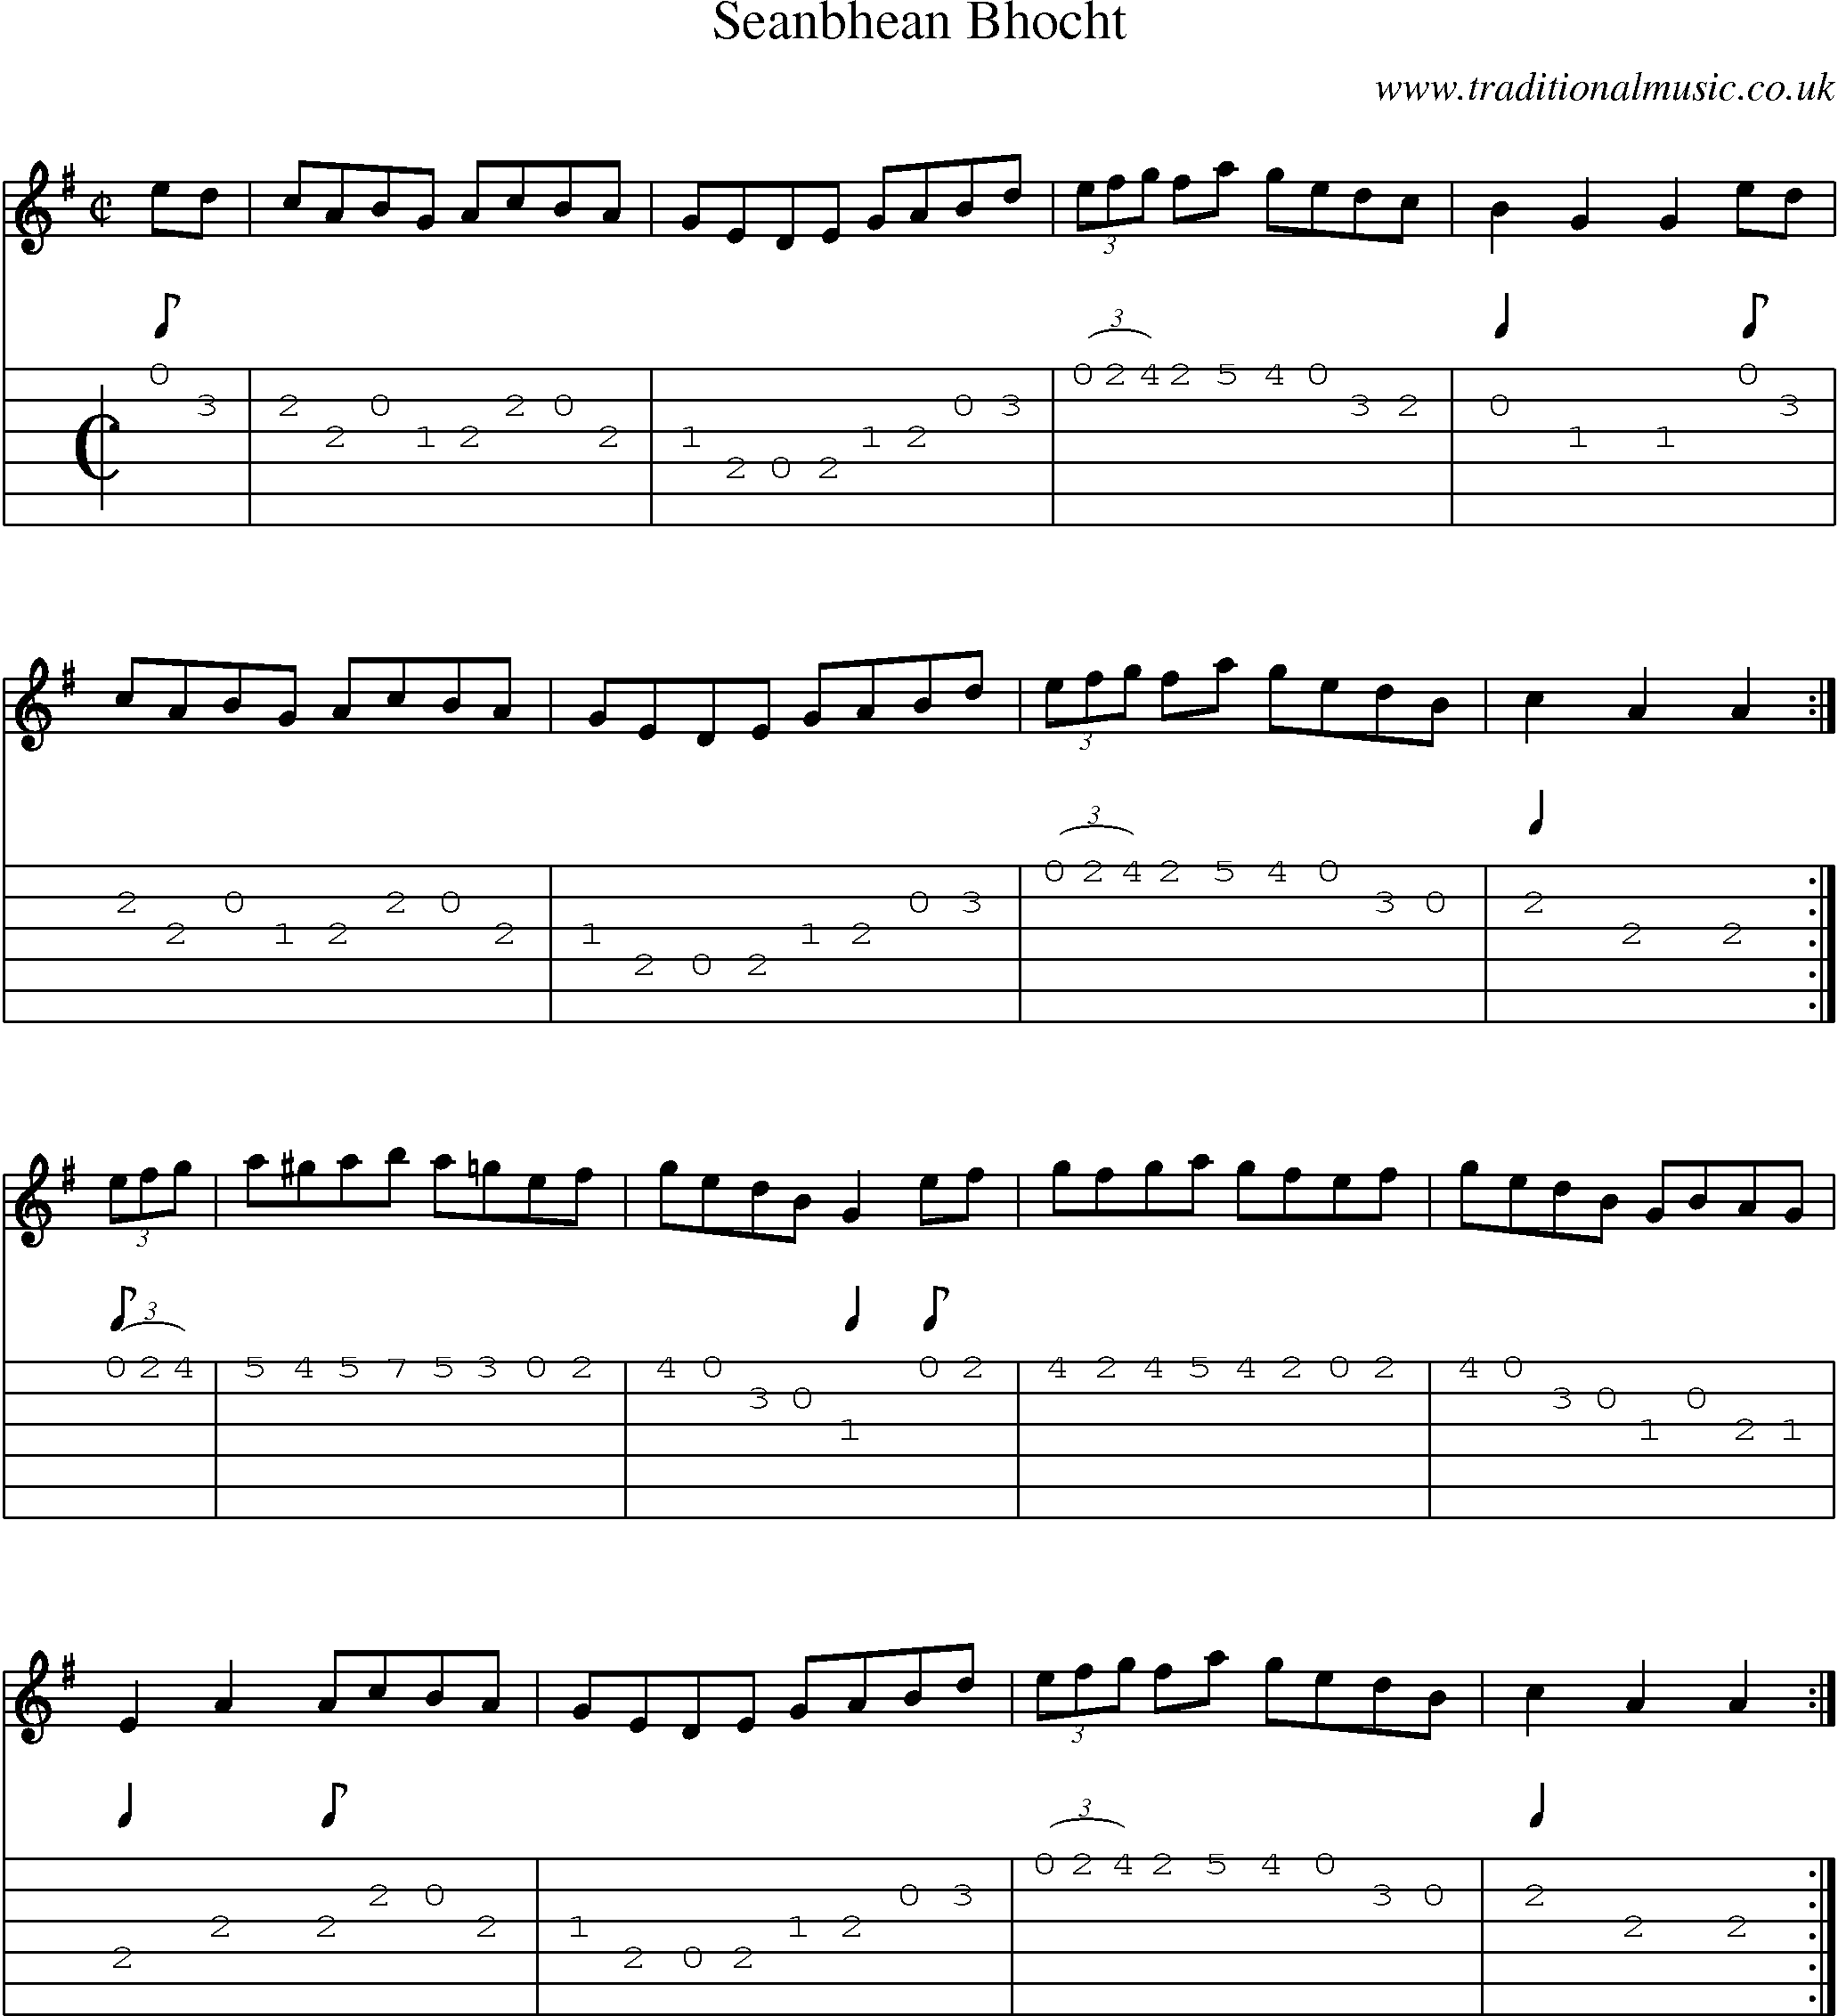 Music Score and Guitar Tabs for Seanbhean Bhocht